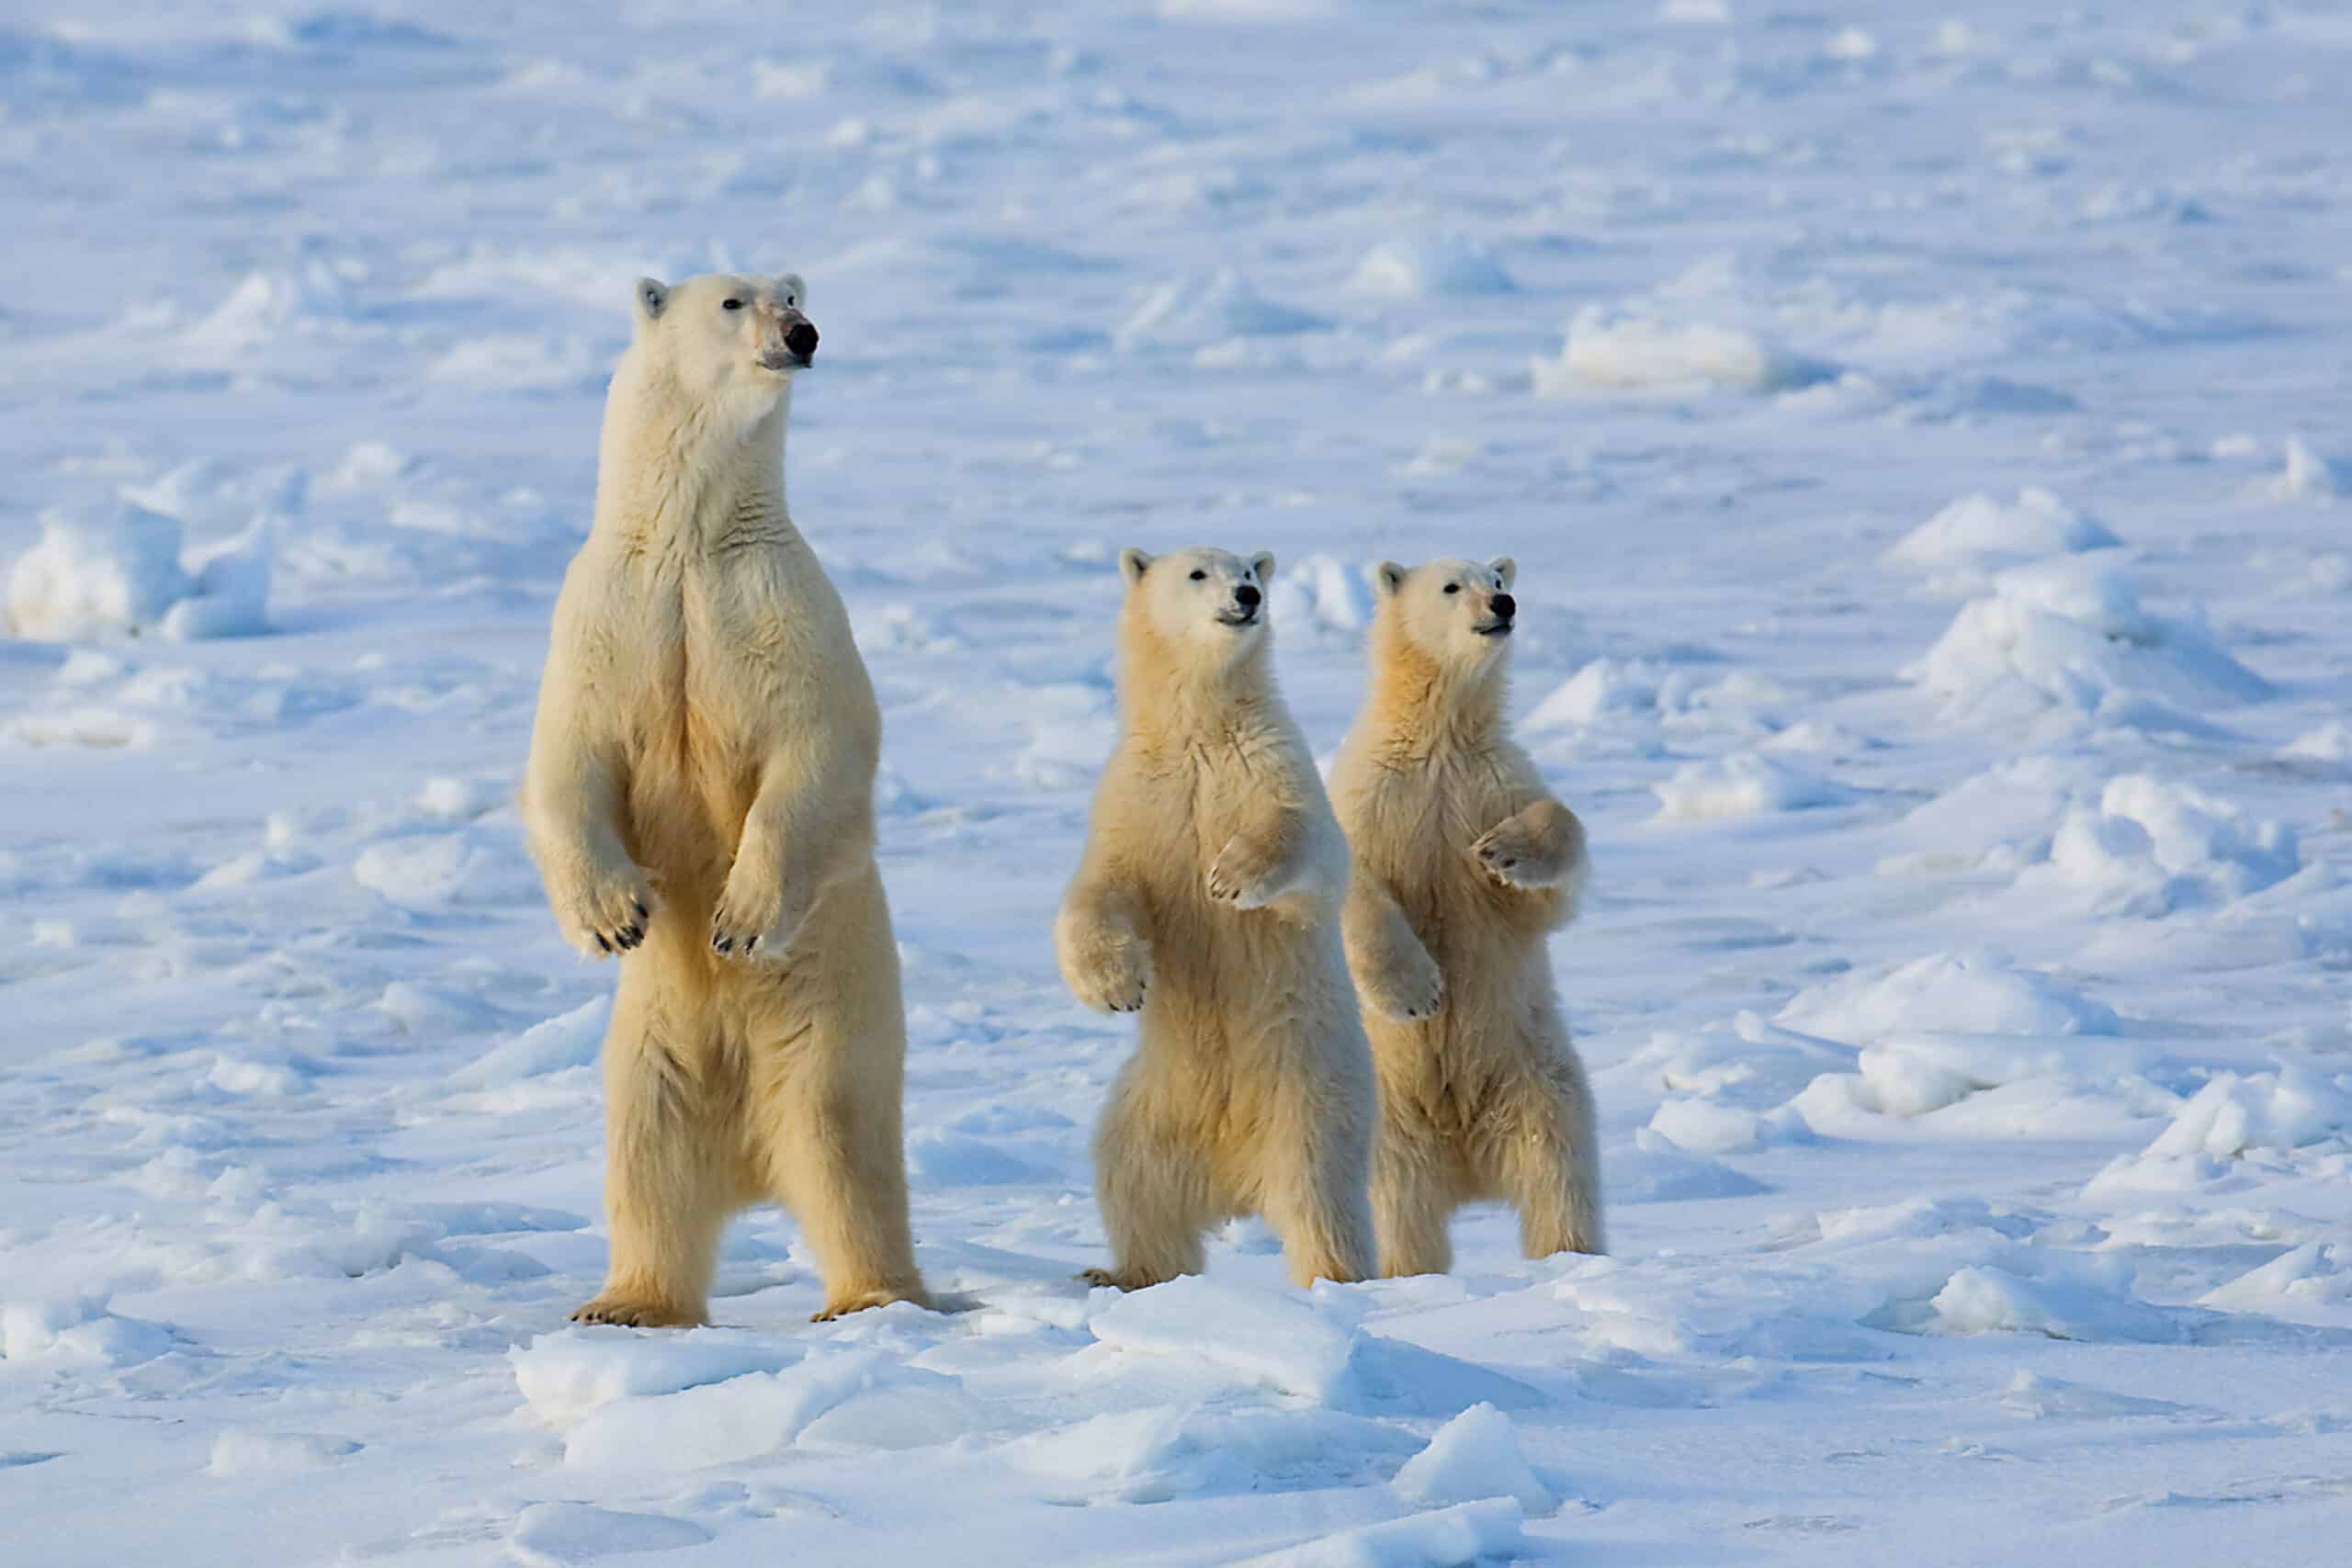 https://www.wildernesstravel.com/wp-content/uploads/2023/07/thumb-CHURCHPO-polar-bear-with-two-cubs-standing-snow-churchill-manitoba-canada-scaled.jpg